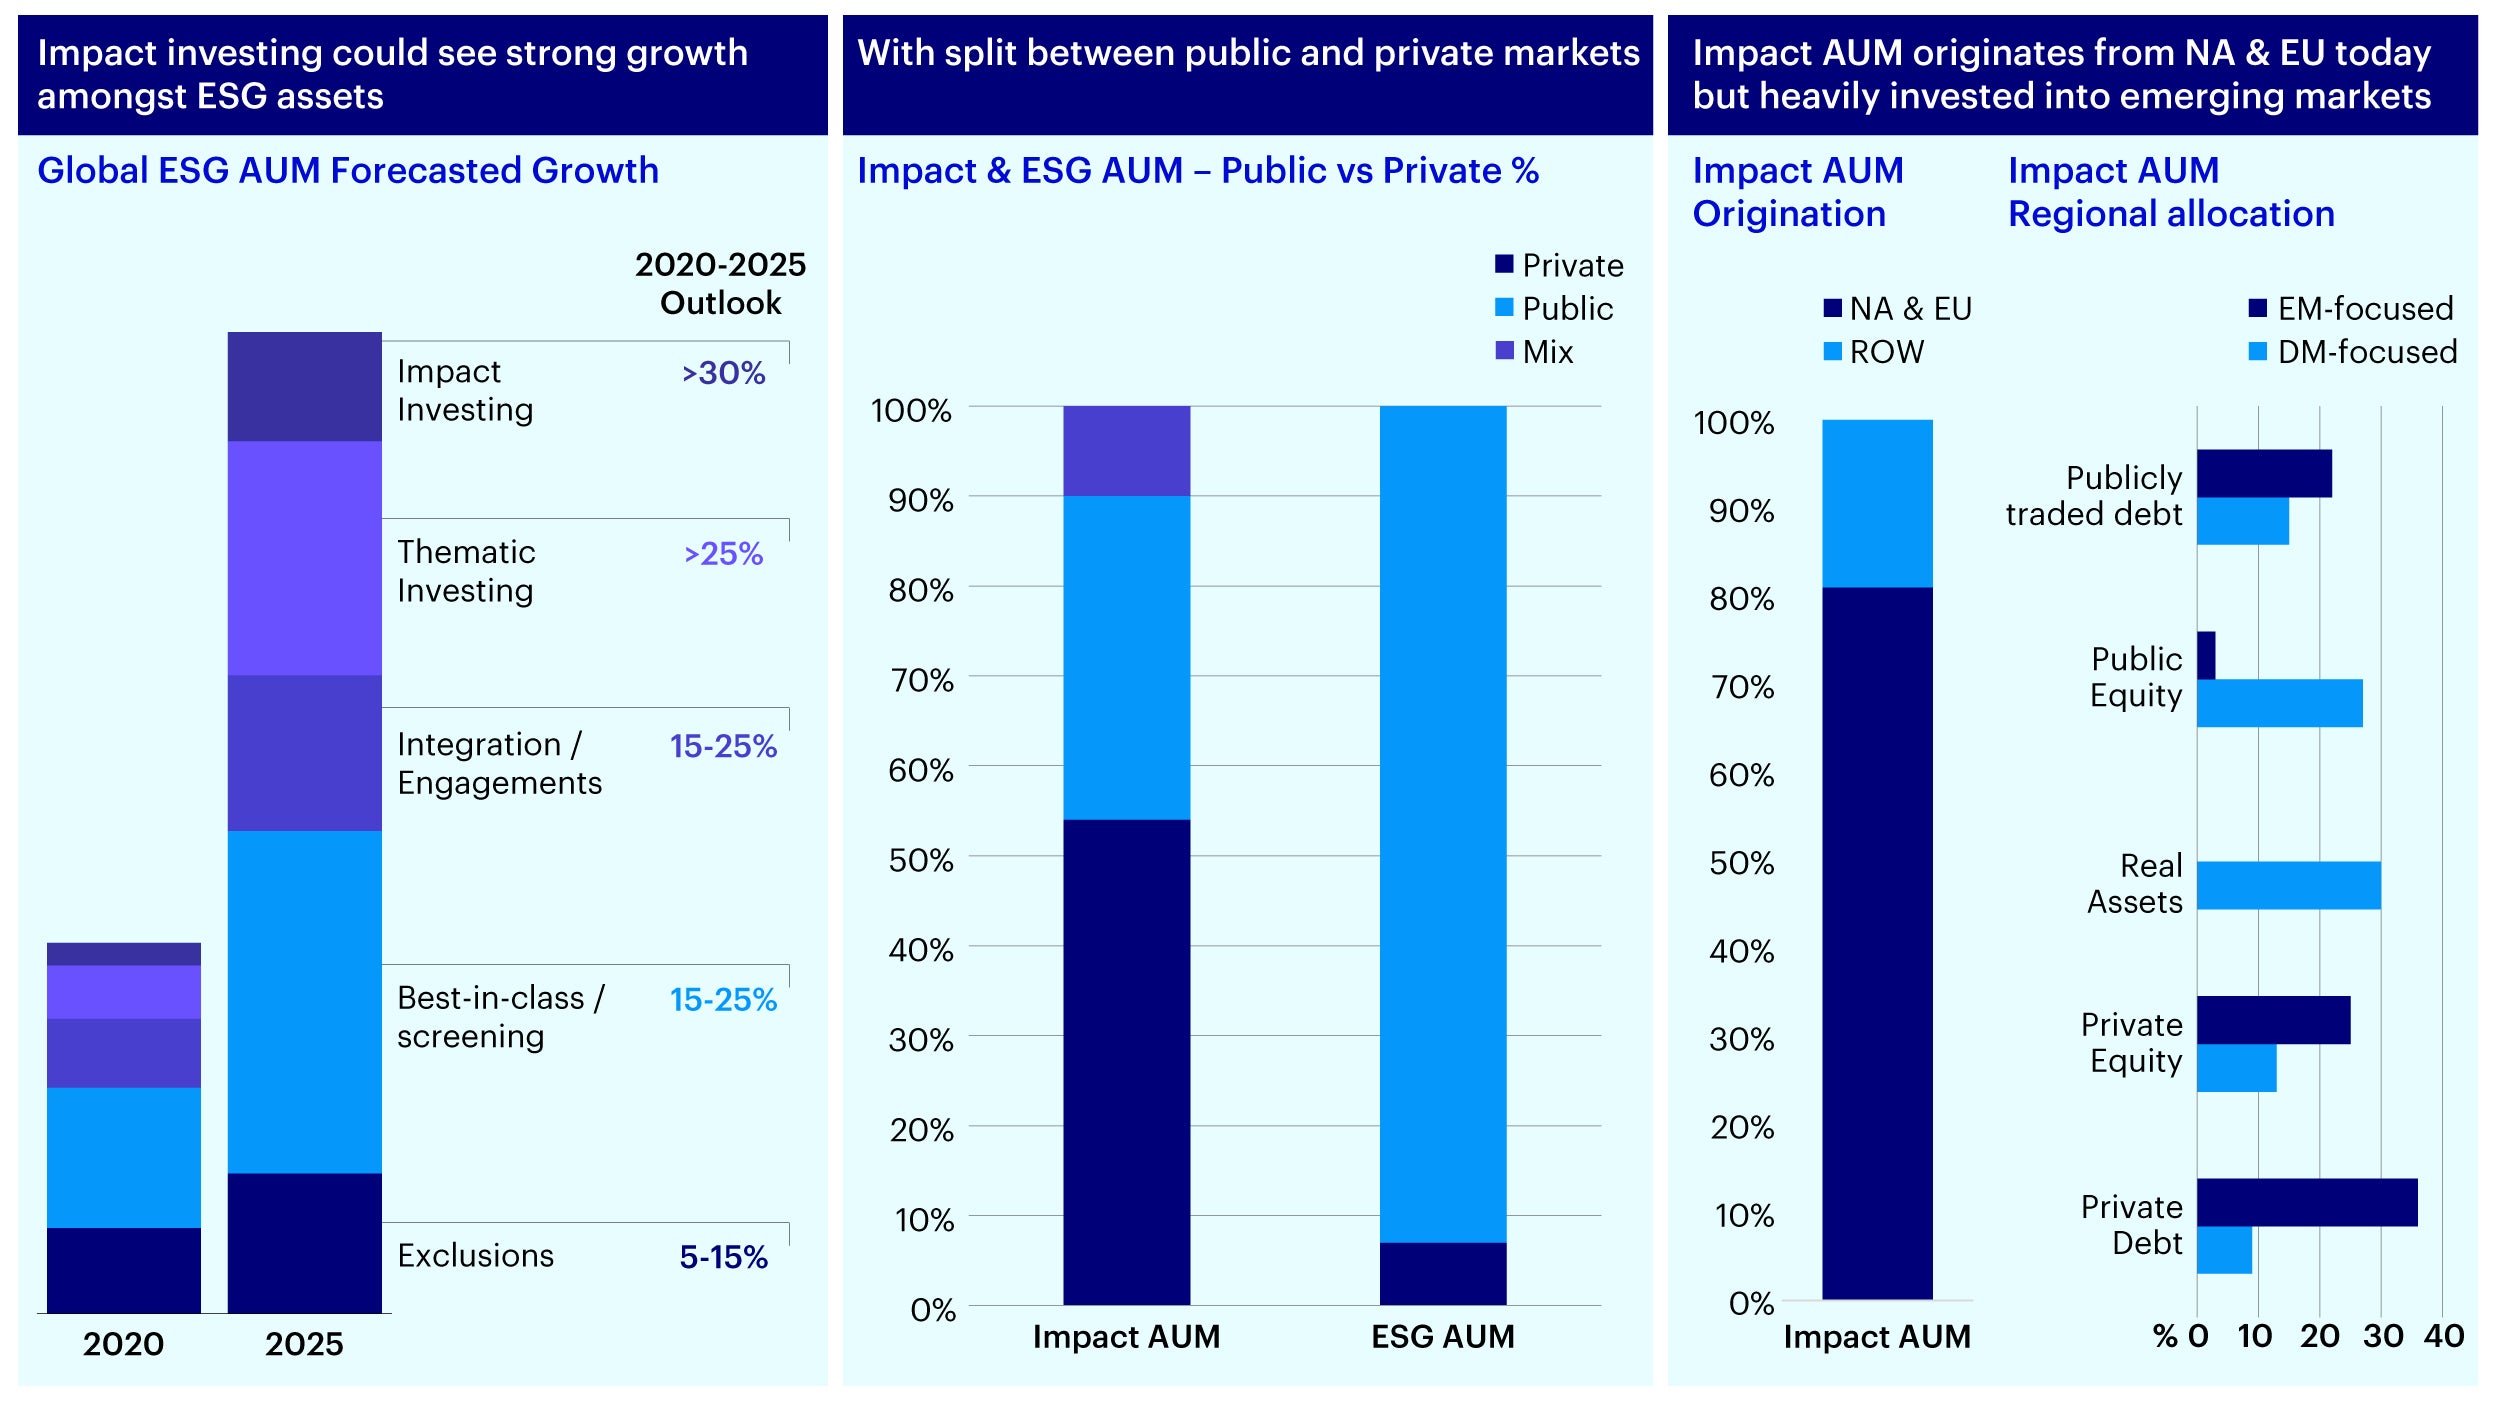 Figure 1 – Case for impact investing: Impact investing could see accelerating growth across public/ private markets especially into emerging markets like Asia 